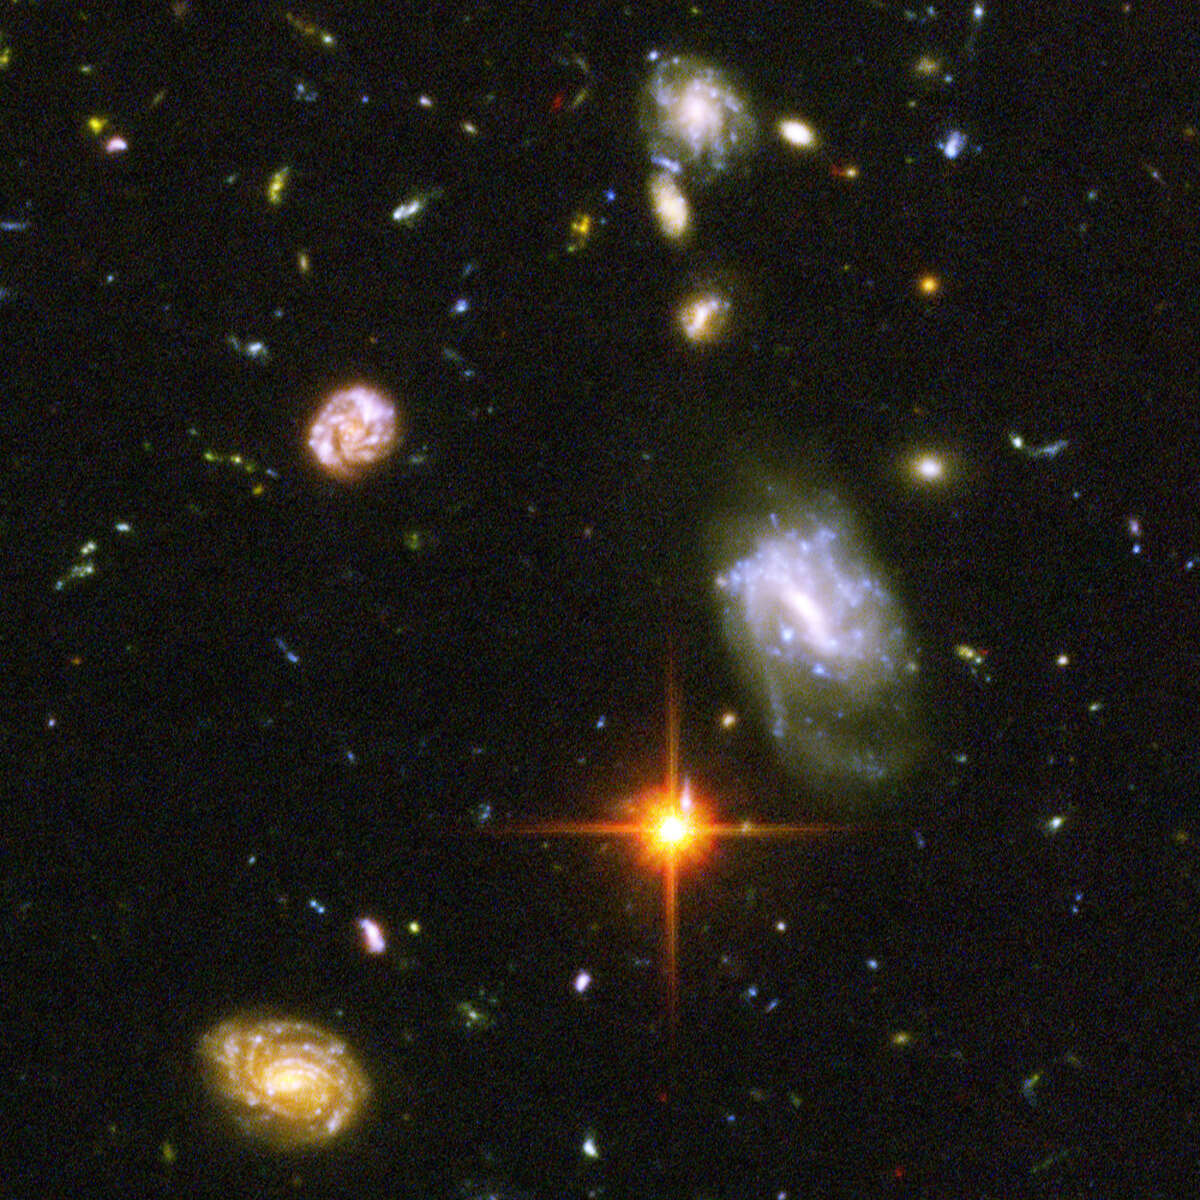 This composite photo by the Hubble Space Telescope, released Tuesday March 9, 2004 by NASA, a long-duration exposure, is the deepest-ever view of the universe, looks back to the edge of the big bang, and shows a chaotic scramble of odd galaxies smashing into each other and re-forming in bizarre shapes. The galaxies in this panel were plucked from a harvest of nearly 10,000 galaxies in the Ultra Deep Field, the deepest visible-light image of the cosmos. The image required 800 exposures taken over the course of 400 Hubble orbits around Earth. The total amount of exposure time was 11.3 days, taken between Sept. 24, 2003 and Jan. 16, 2004. (AP Photo/NASA) HOUCHRON CAPTION (07/11/2005) SECSTAR COLOR: REACHING OUT: So far, our attempts to find life in other galaxies haven't turned up anything. However, many scientists believe that we are within a generation of making contact.